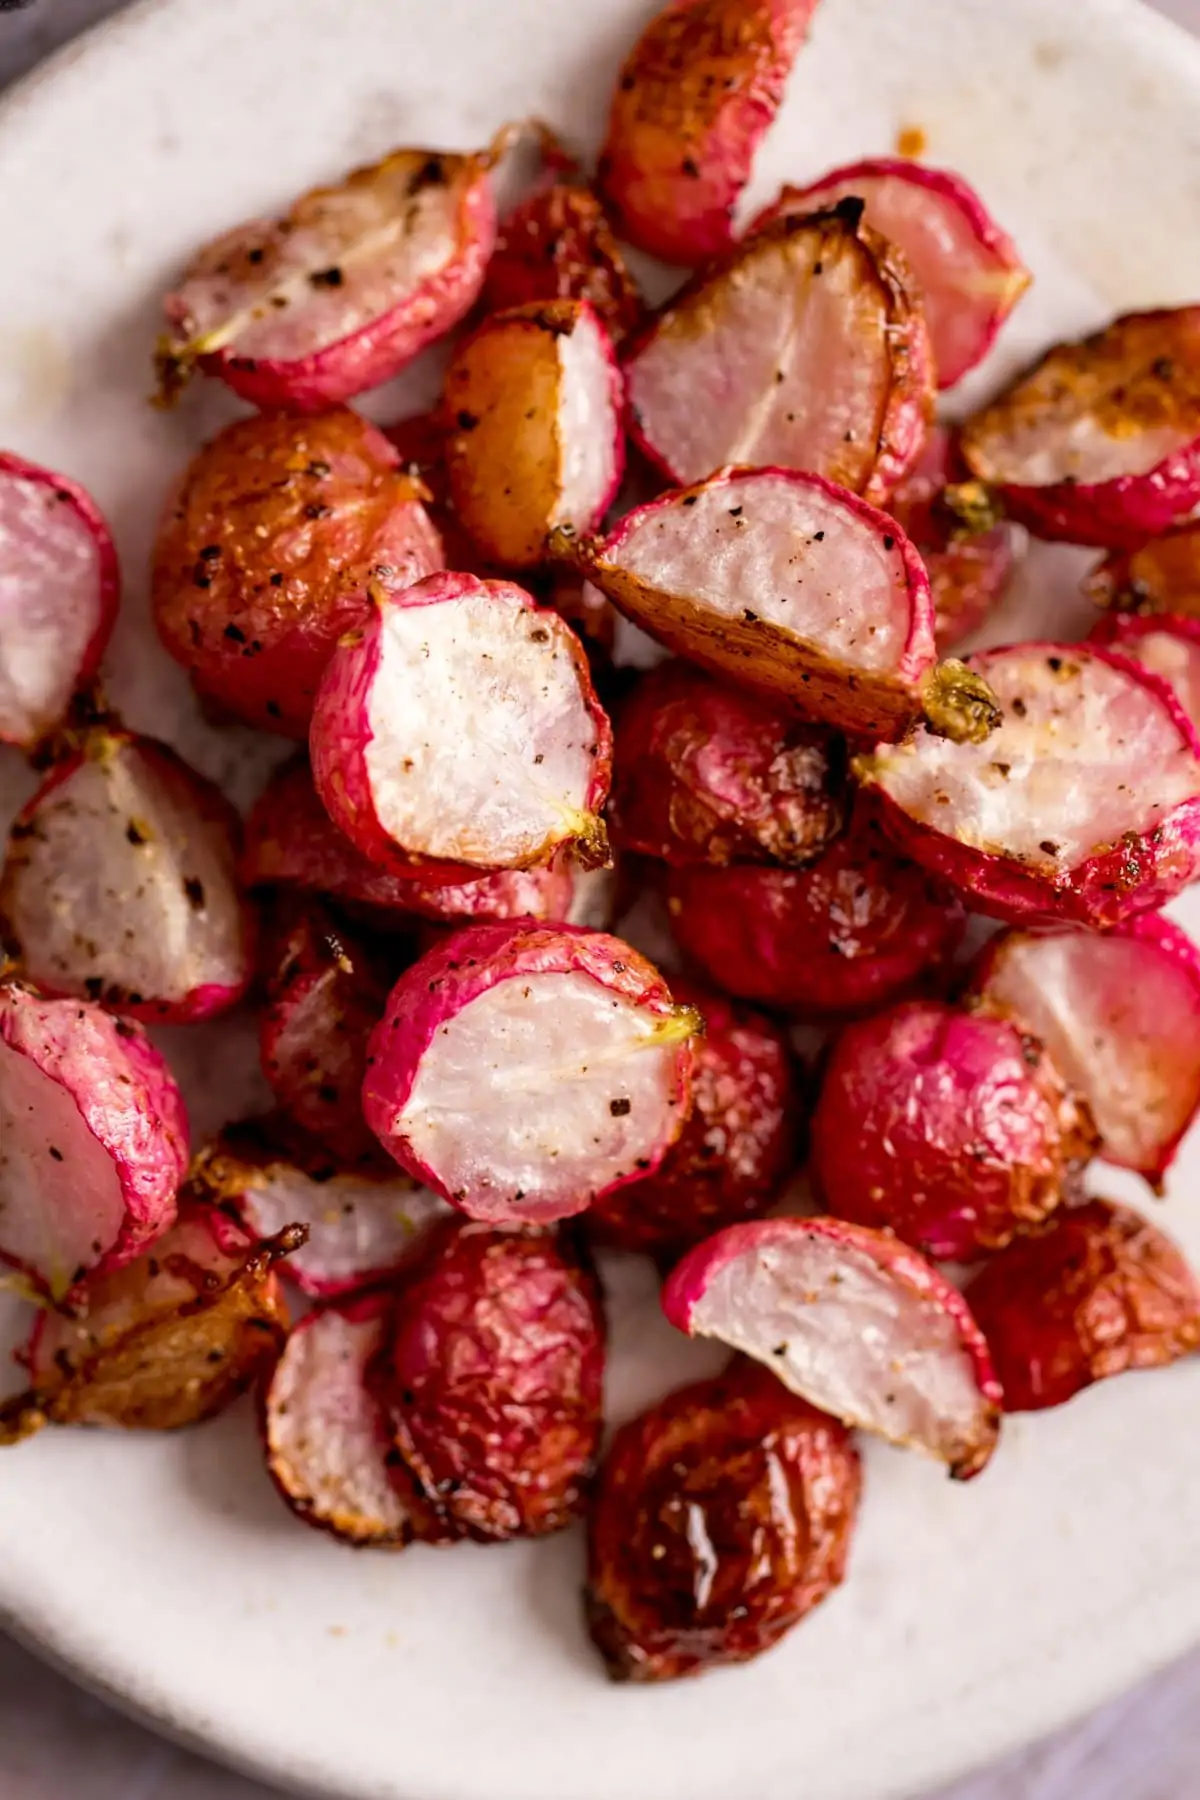 Overhead image of halved roasted radishes on a white plate.